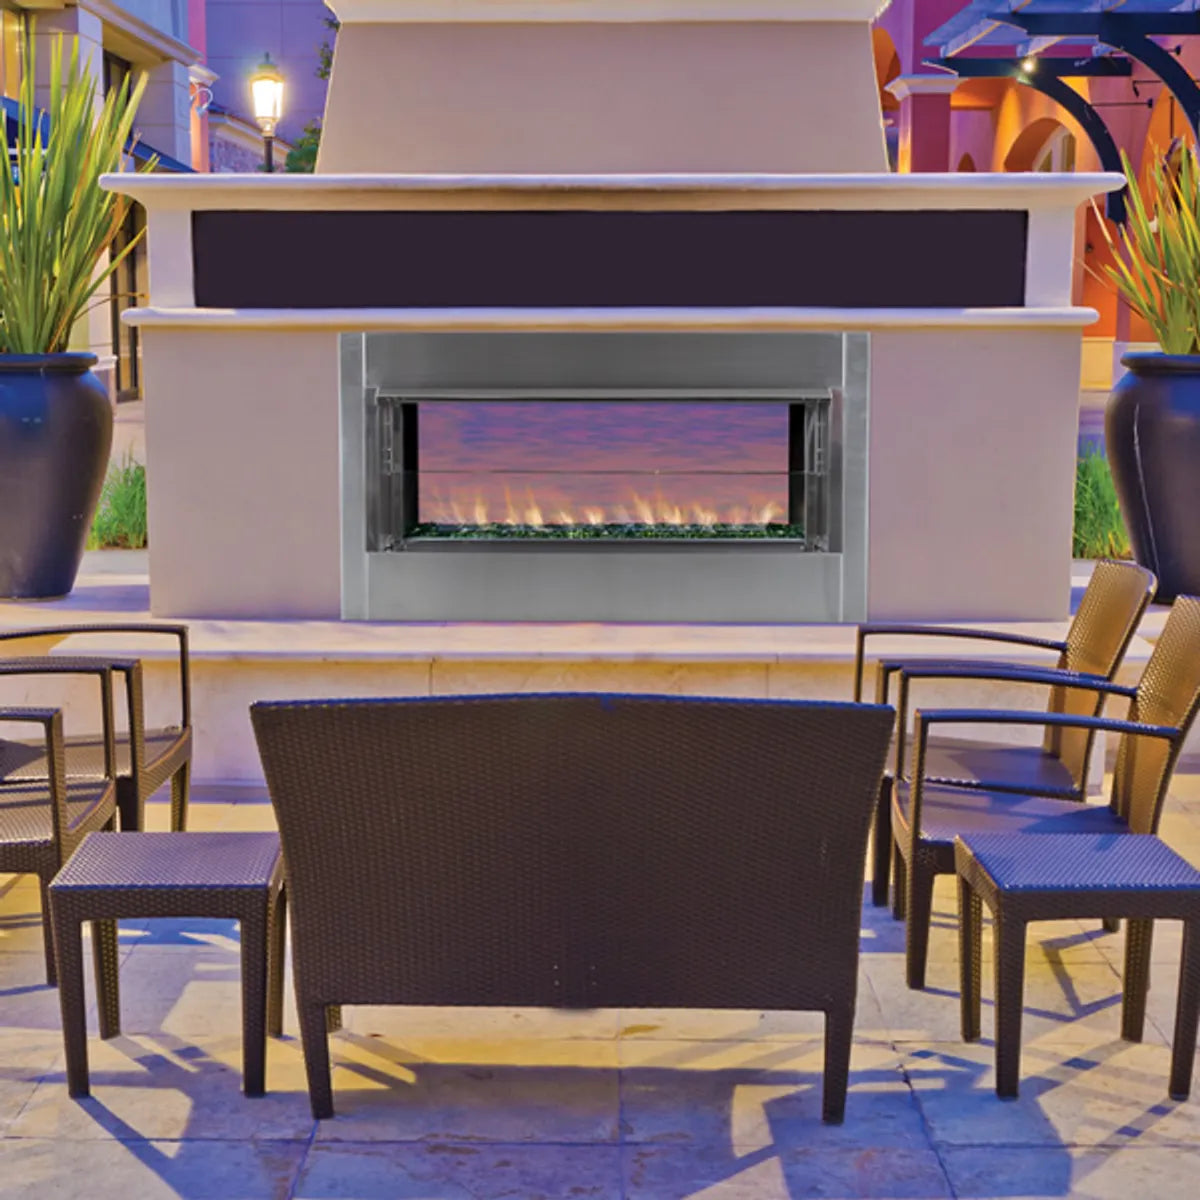 Superior VRE4543 Linear See-Through Outdoor Gas Fireplace